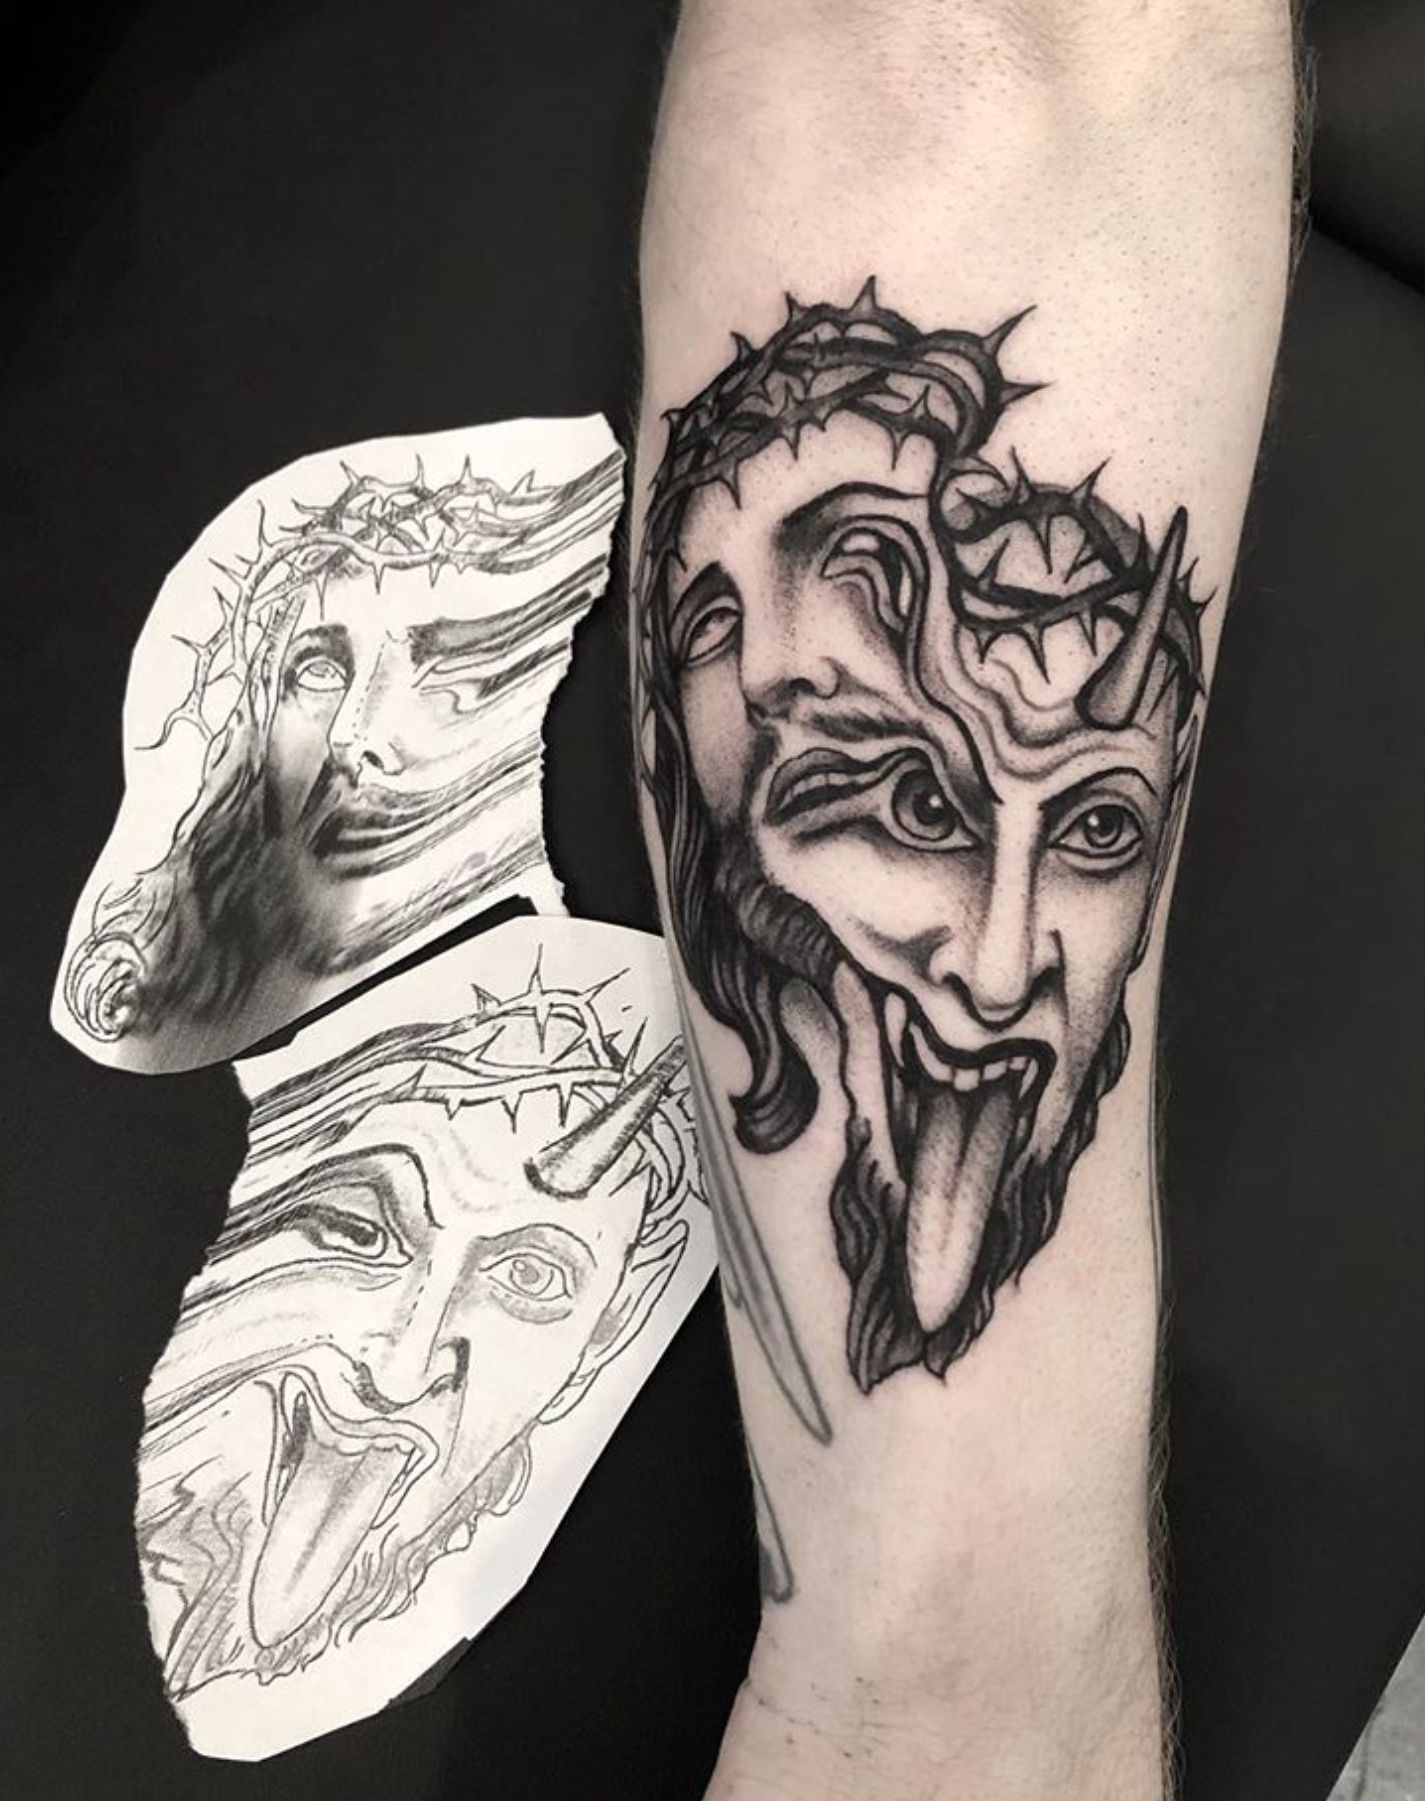 Surrealist double exposure tattoo on the right side of